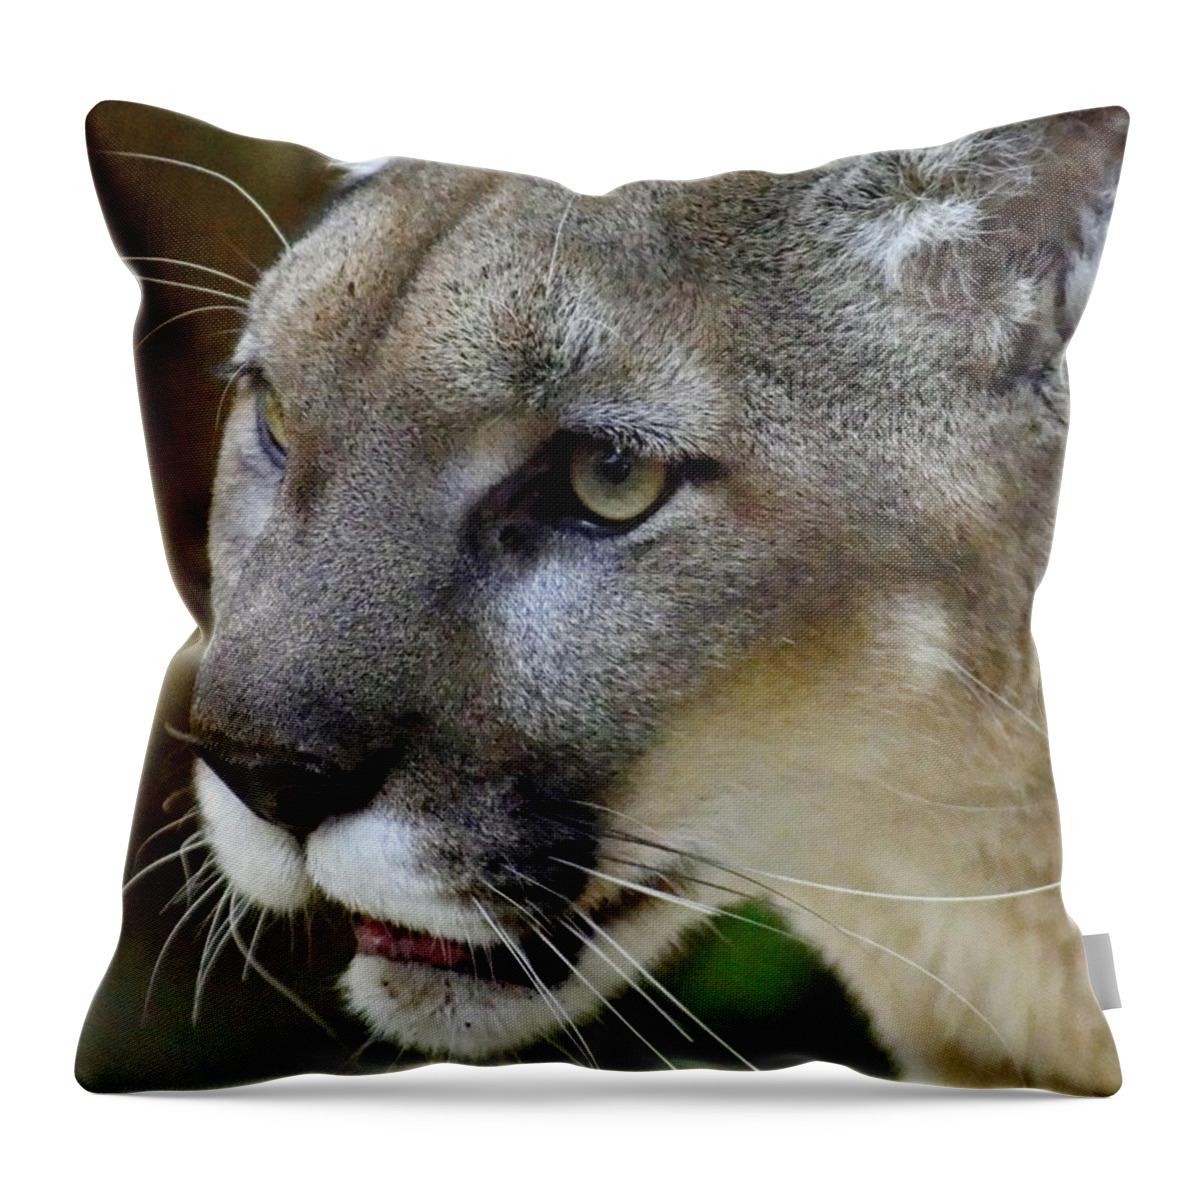 A Puma By Any Other Name Throw Pillow featuring the photograph A Puma By Any Other Name -- Mountain Lion at Living Desert Zoo and Gardens, Palm Desert, California by Darin Volpe